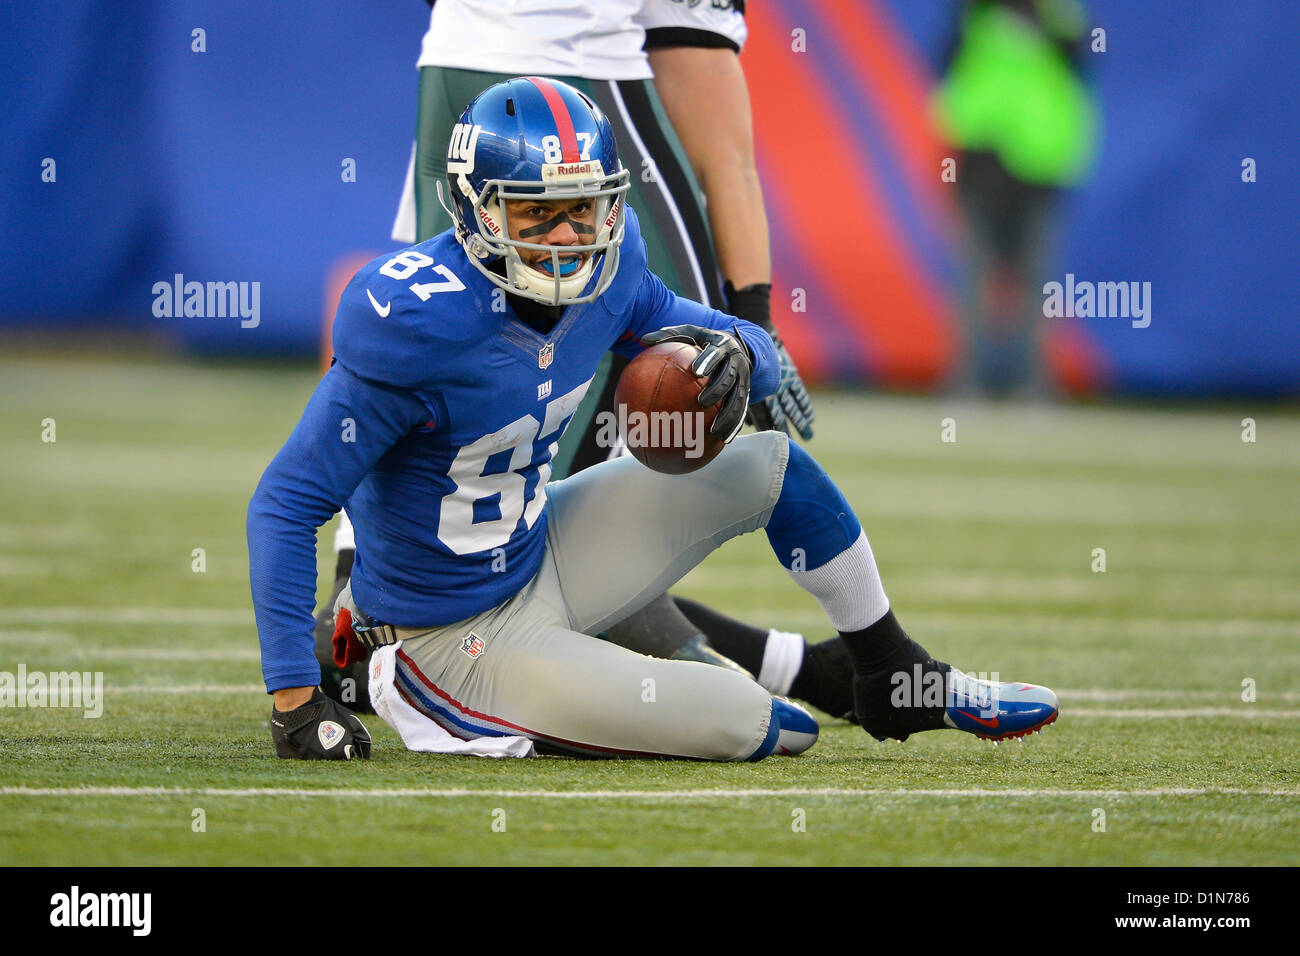 New Jersey, USA. 30 December 2012: New York Giants wide receiver Domenik Hixon (87) after a reception during a week 17 NFL matchup between the Philadelphia Eagles and New York Giants at MetLife Stadium in East Rutherford, New Jersey. The Giants defeated the Eagles 42-7. Stock Photo